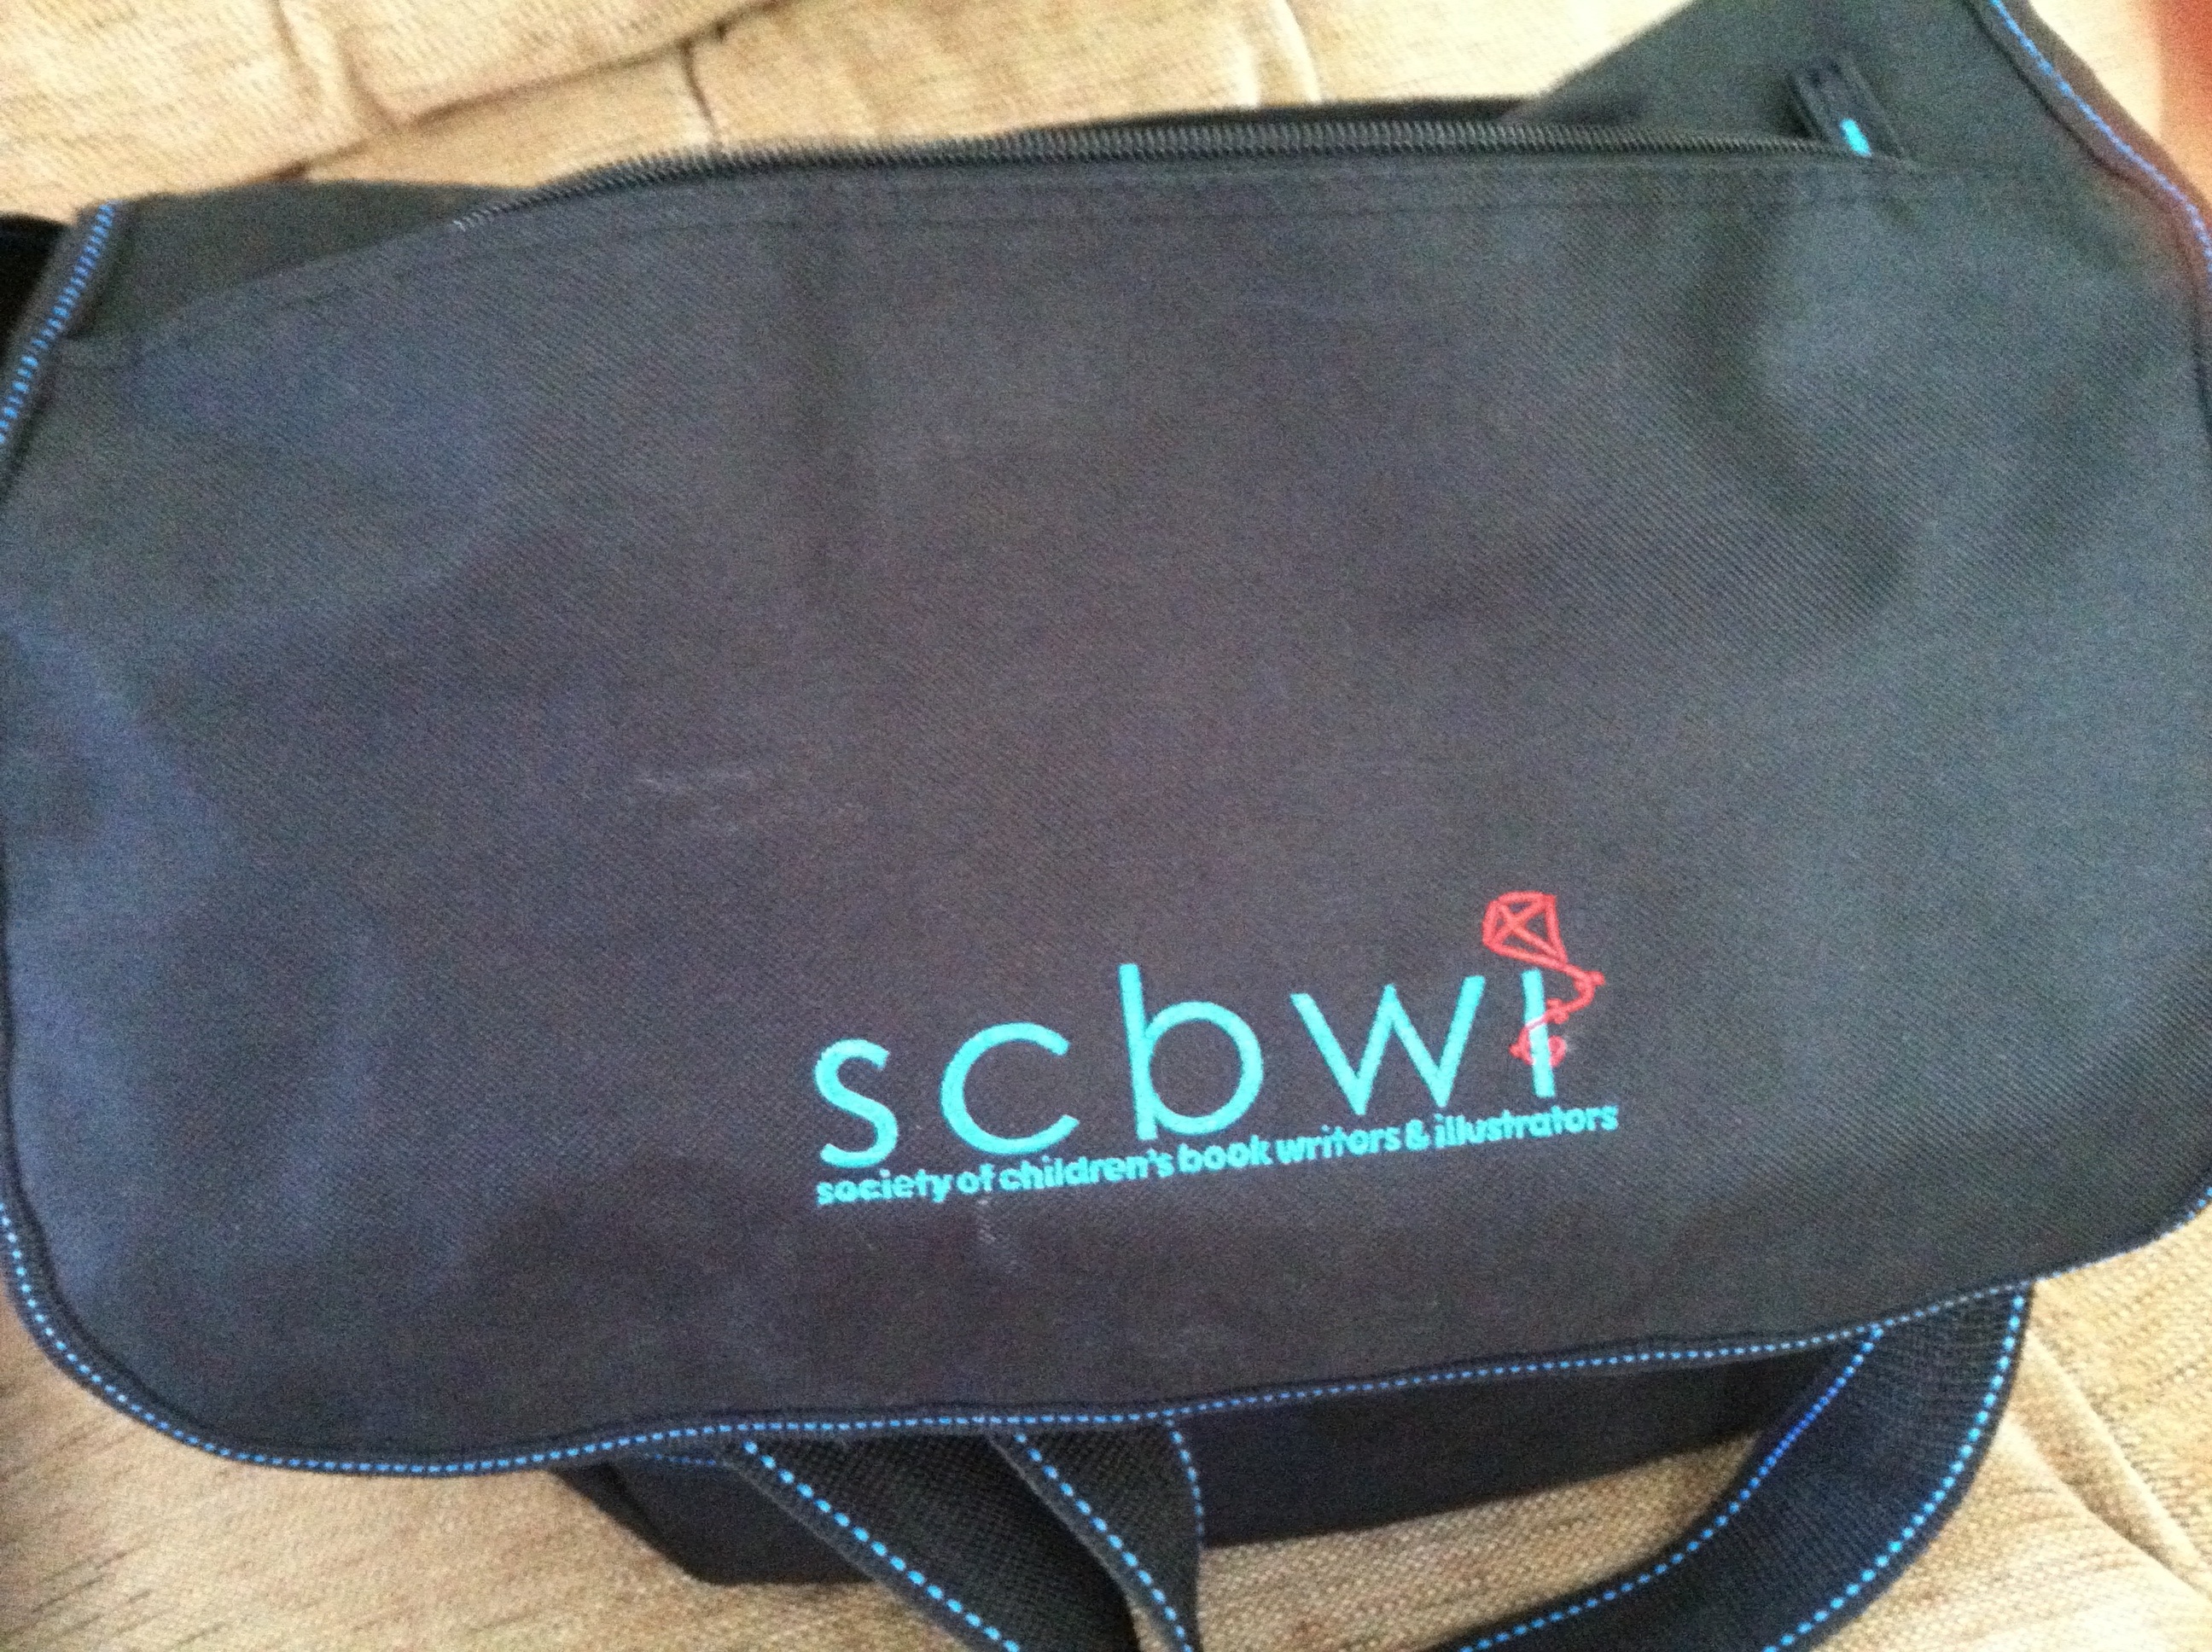 Then I got my trusty SCBWI messenger bag (which was only 15 bucks by the way, seriously A STEAL!)